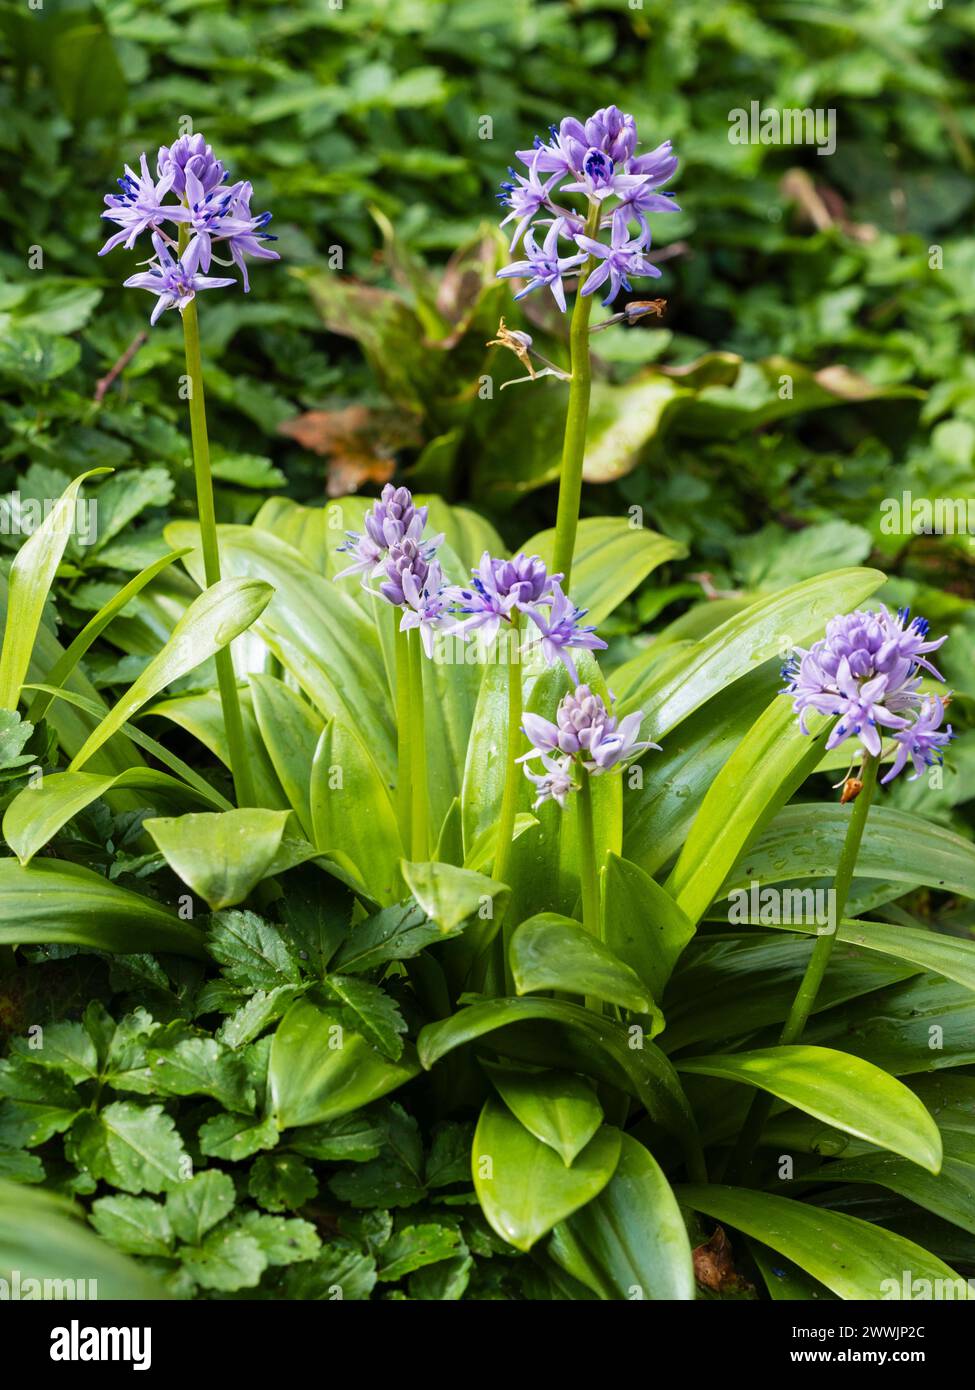 Early spring spikes of the lavender-blue flowers of the hardy Pyrenean squill bulb, Scilla lilio-hyacinthus Stock Photo